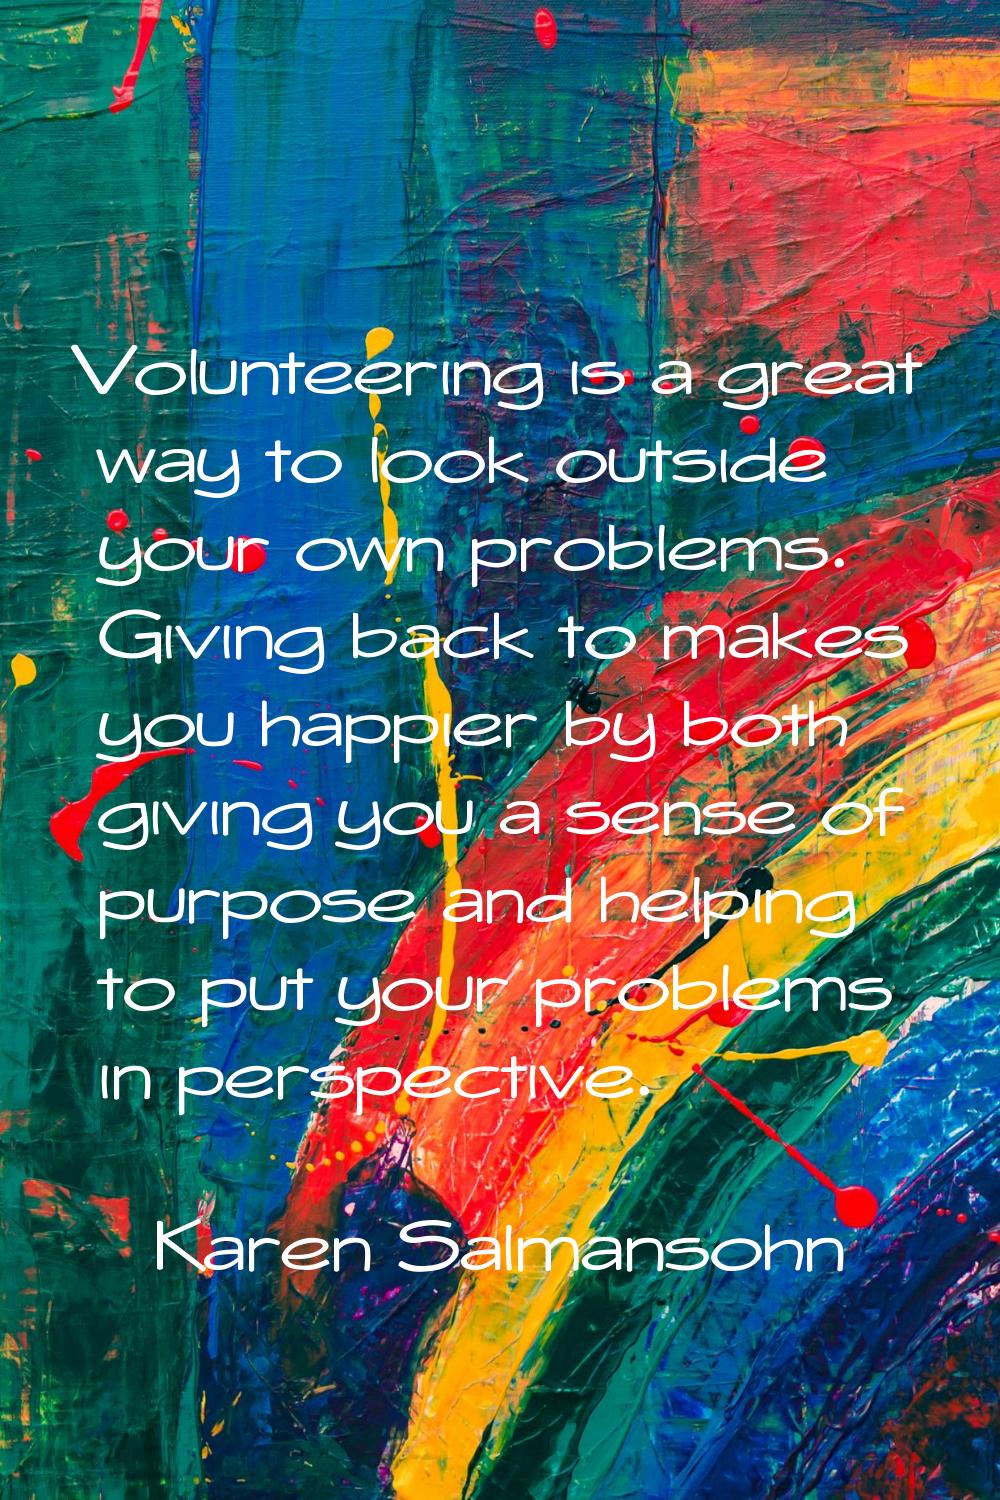 Volunteering is a great way to look outside your own problems. Giving back to makes you happier by 